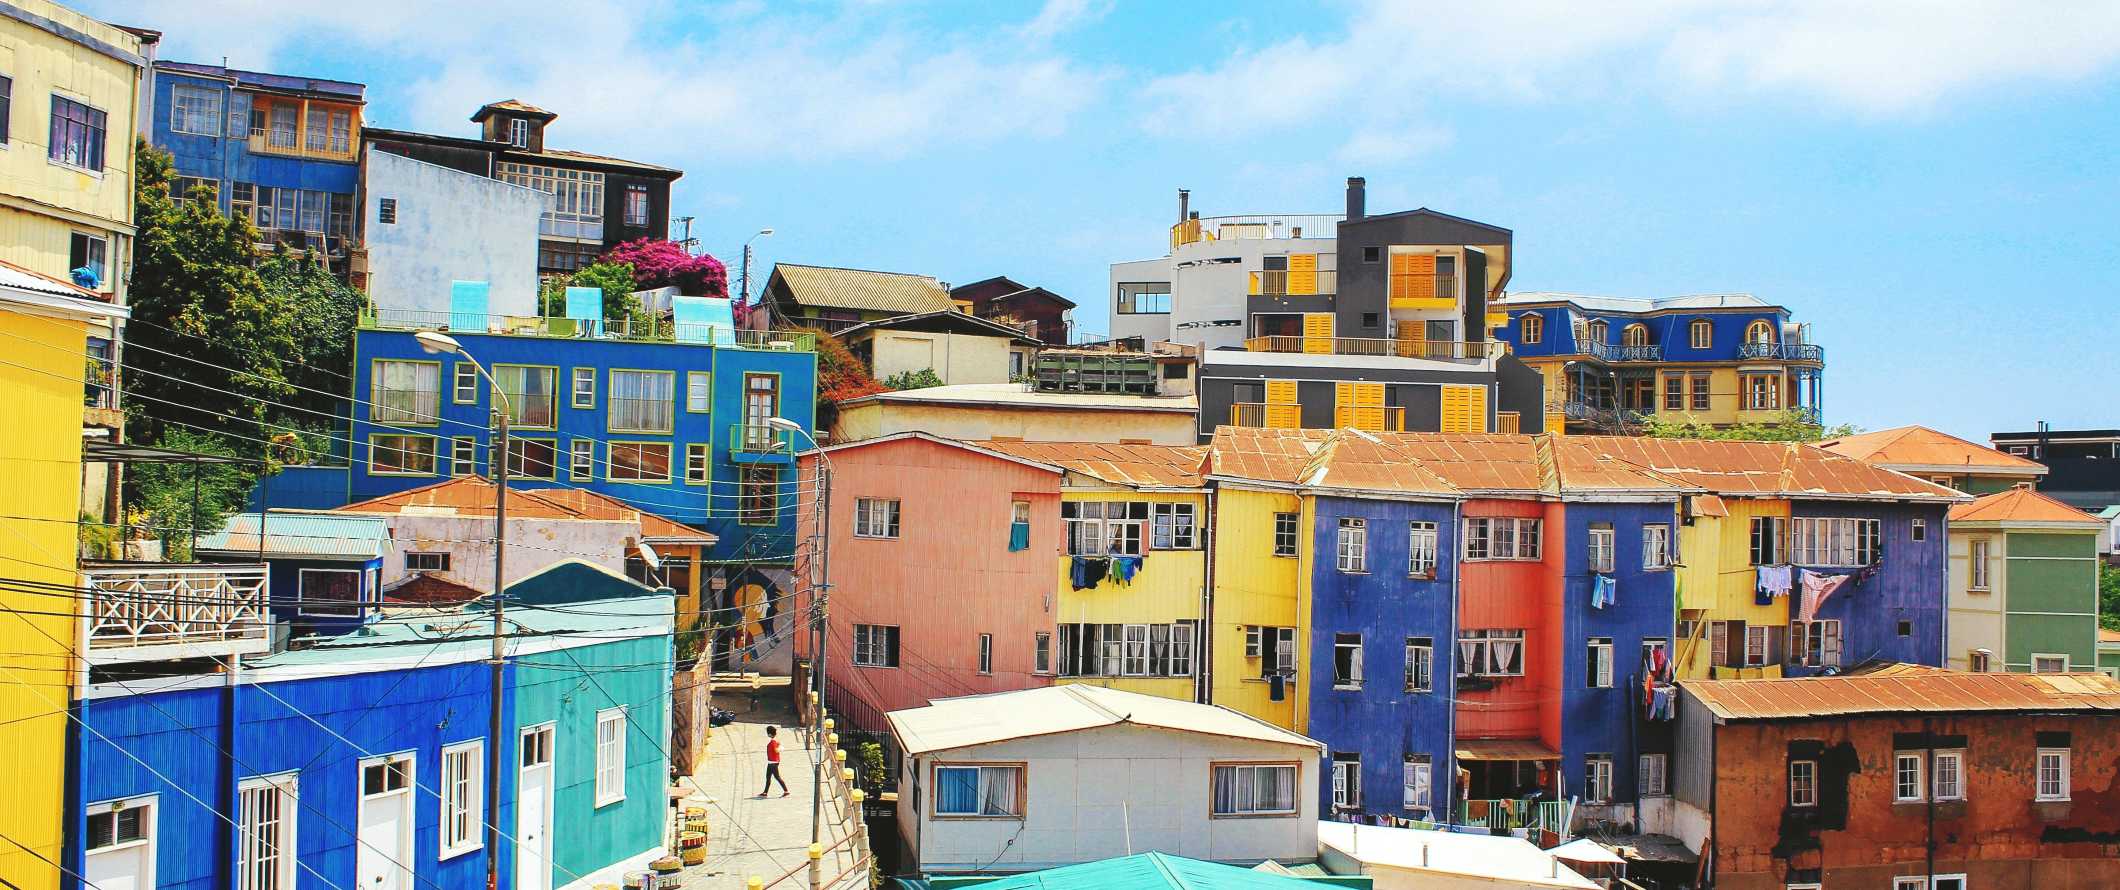 Colorful buildings in the city of Valparaiso, Chile